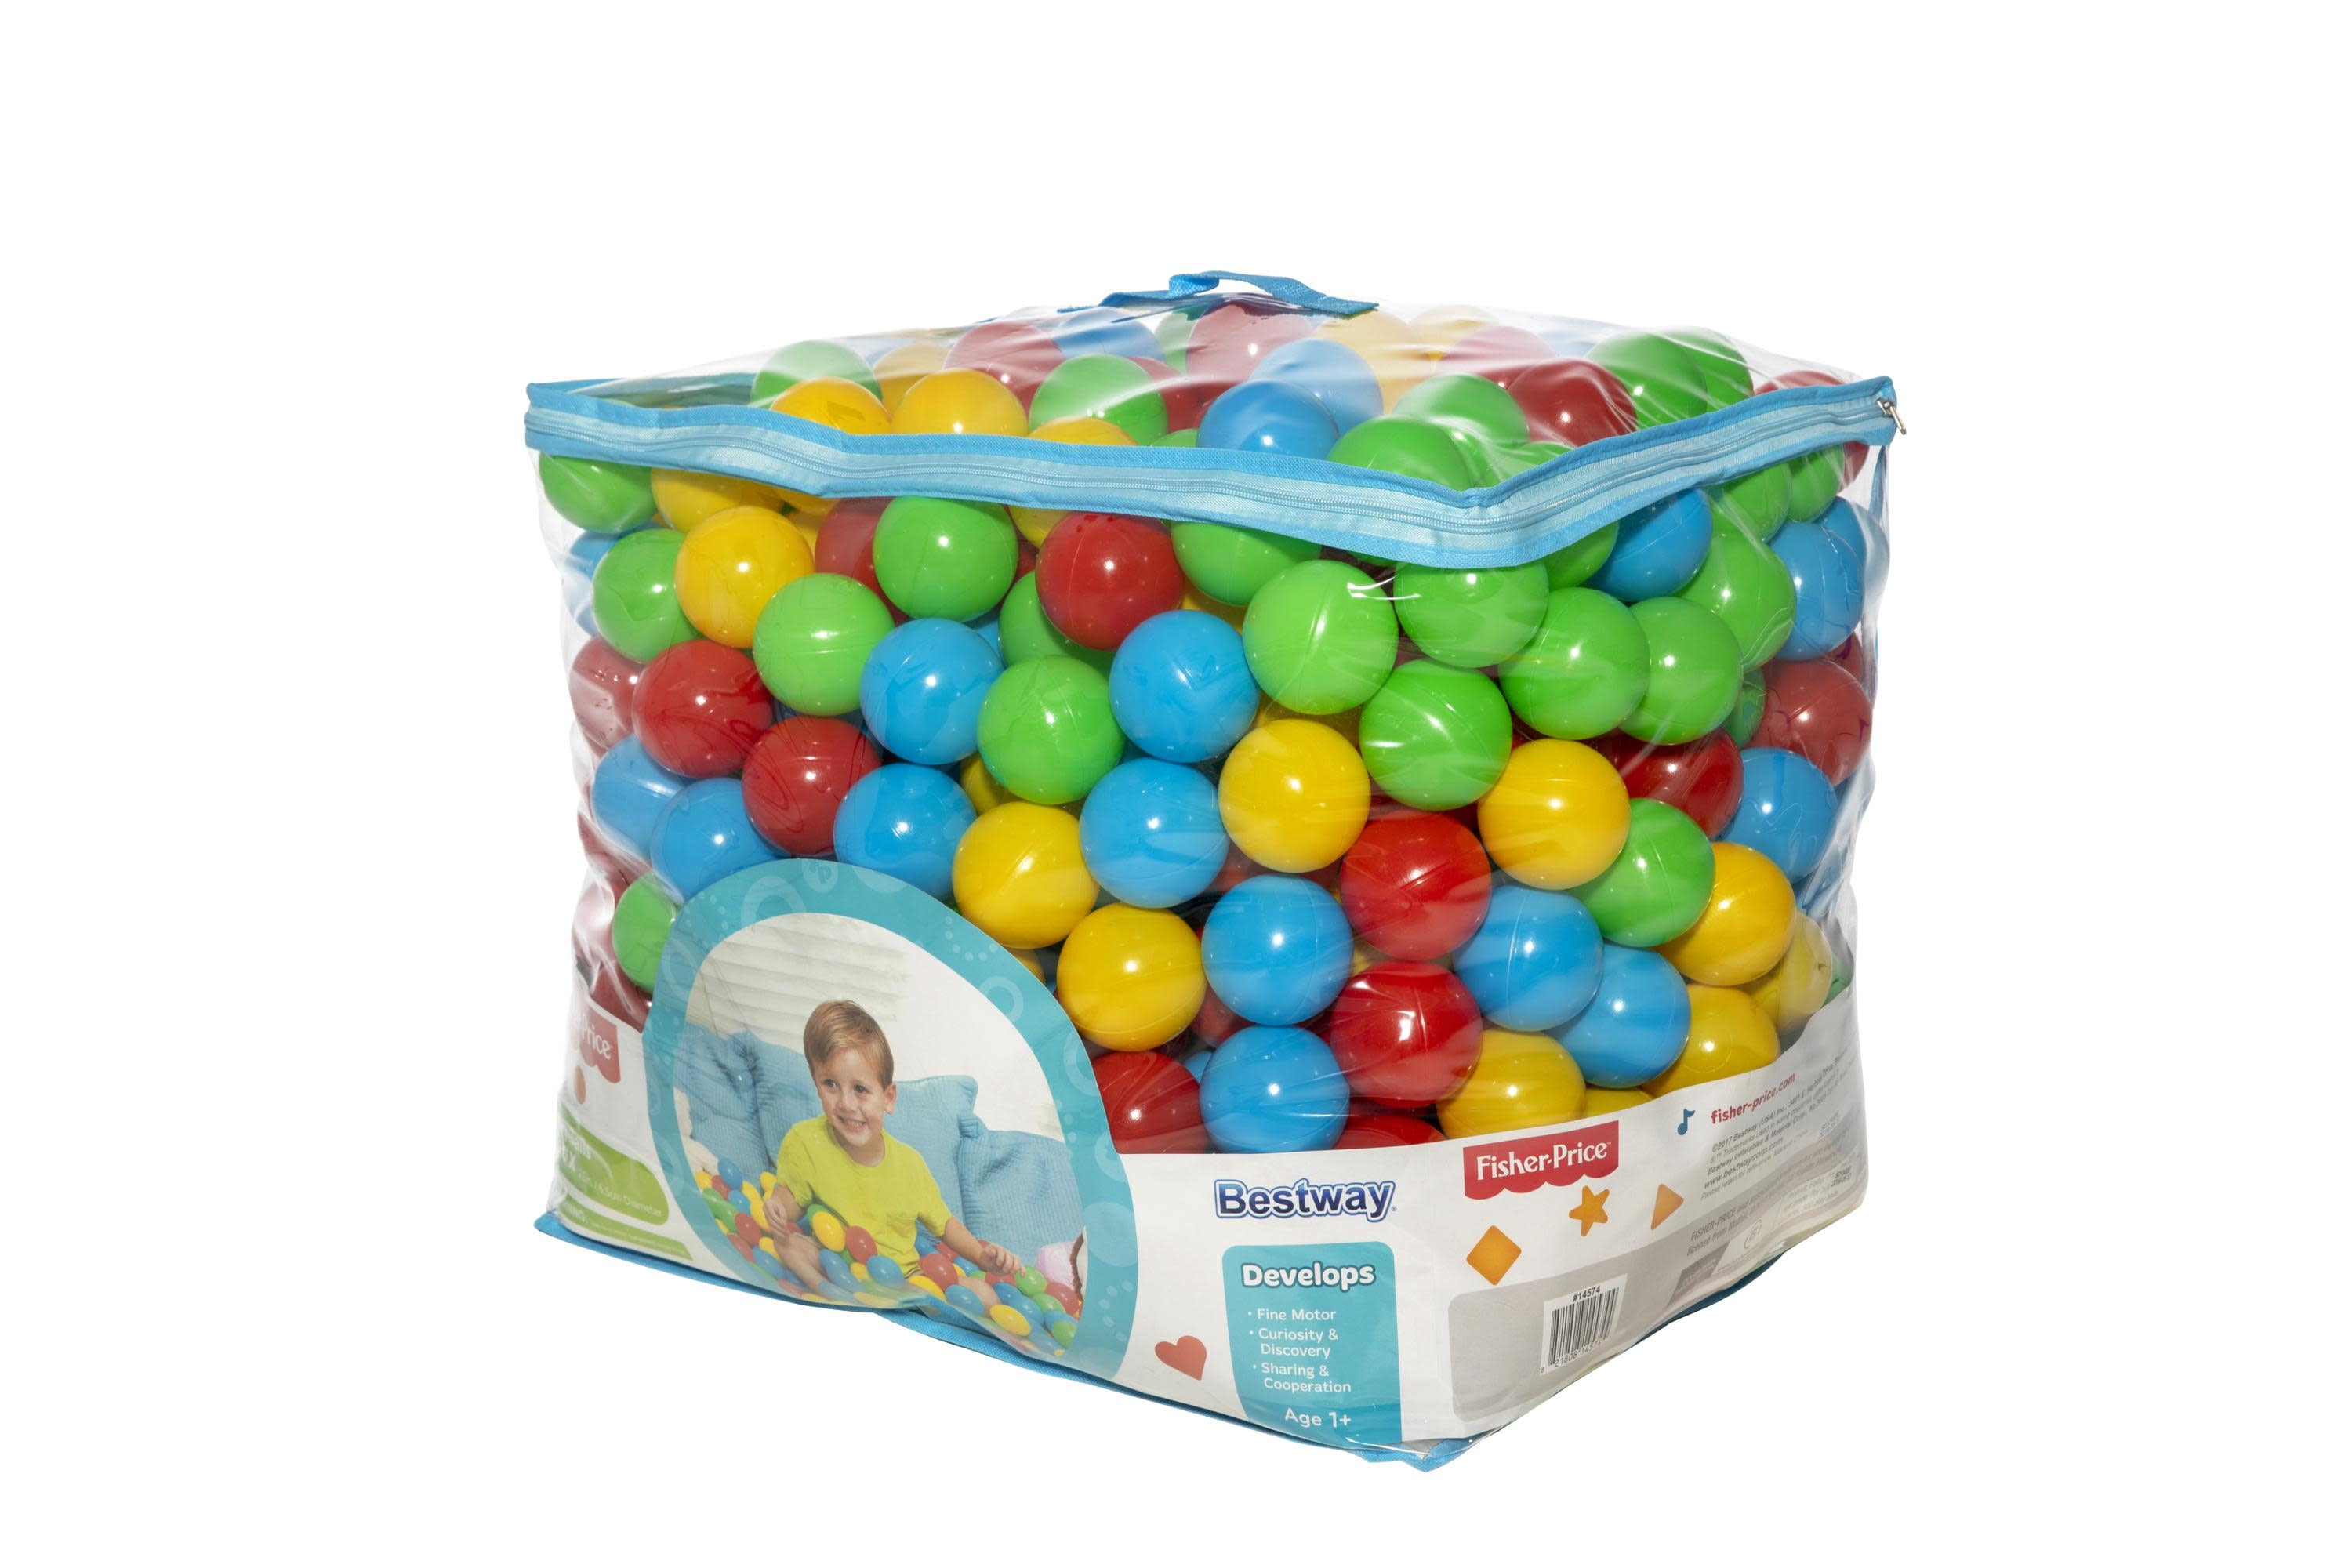 Draw Mesh Bag Crush Resistant 500 Plastic Balls for Bounce House or Ball Pit 